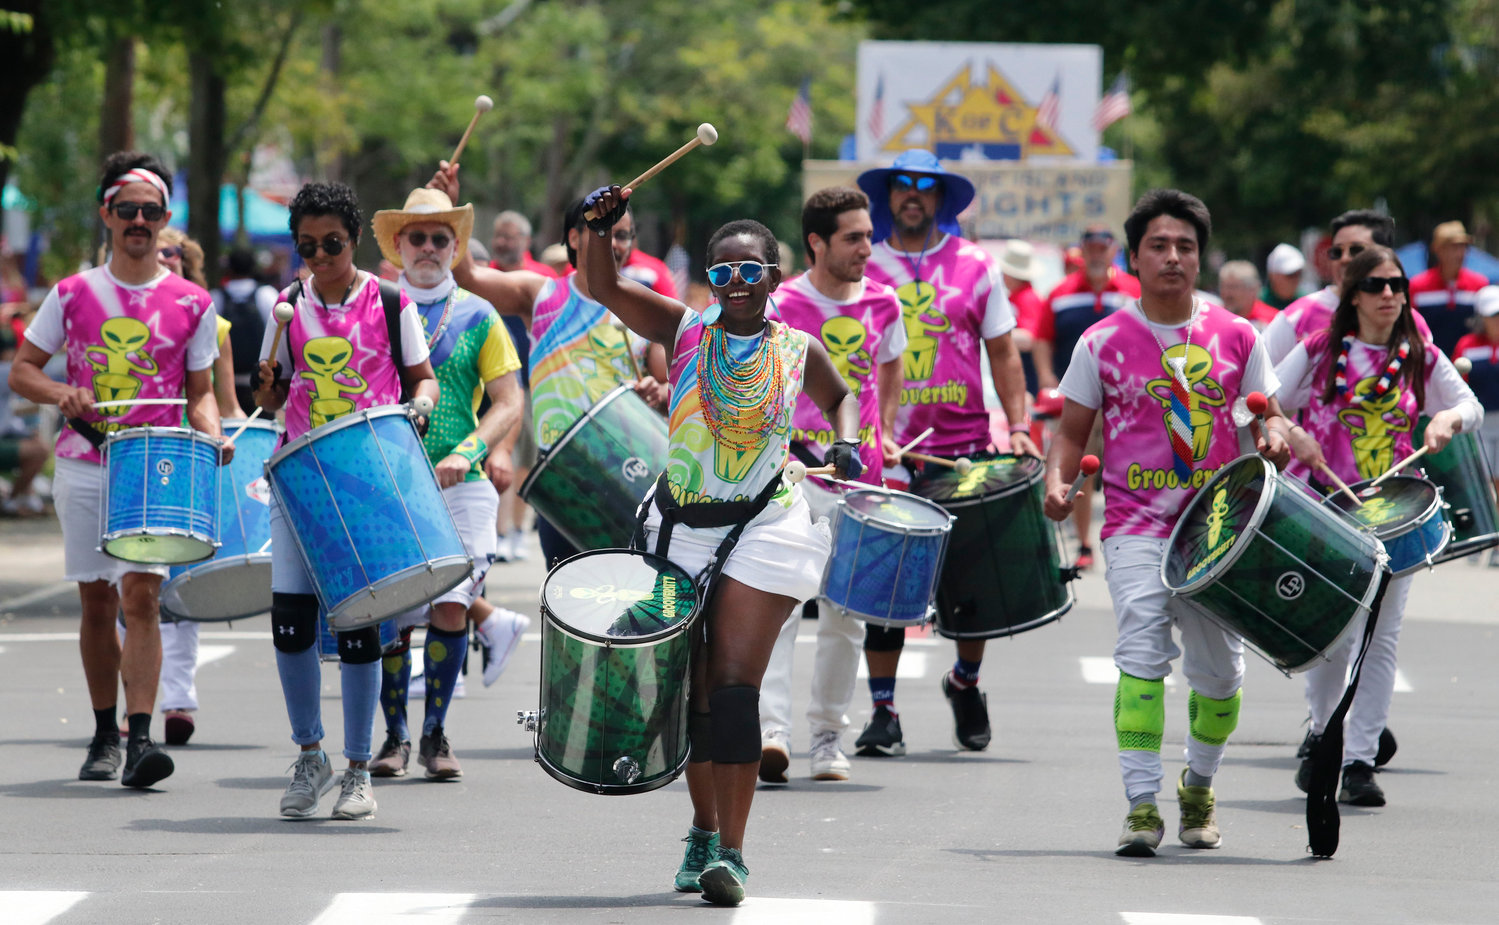 The Grooversity Brazilian drum band brings energy and rhythm to the parade.